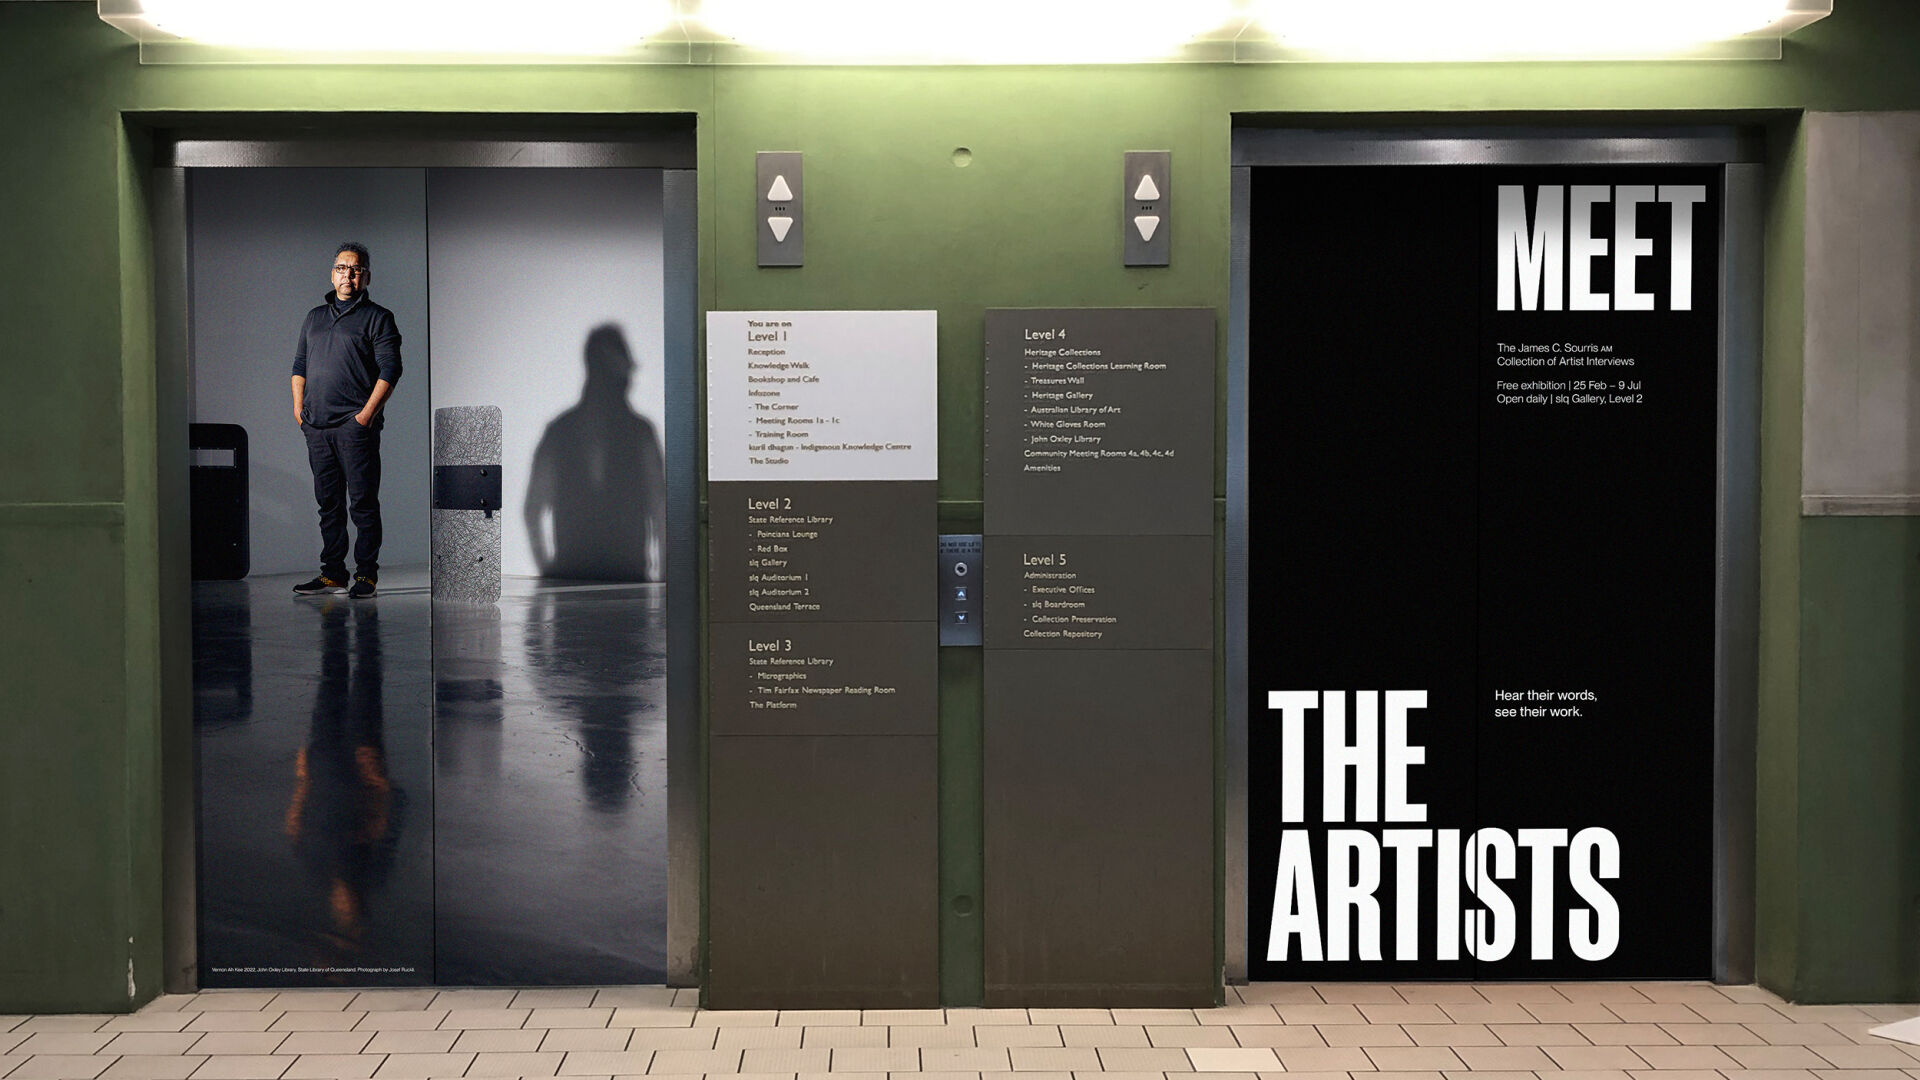 Lift wrap designed for the Meet The Artists Exhibition in Brisbane, featuring photography and strong typography.